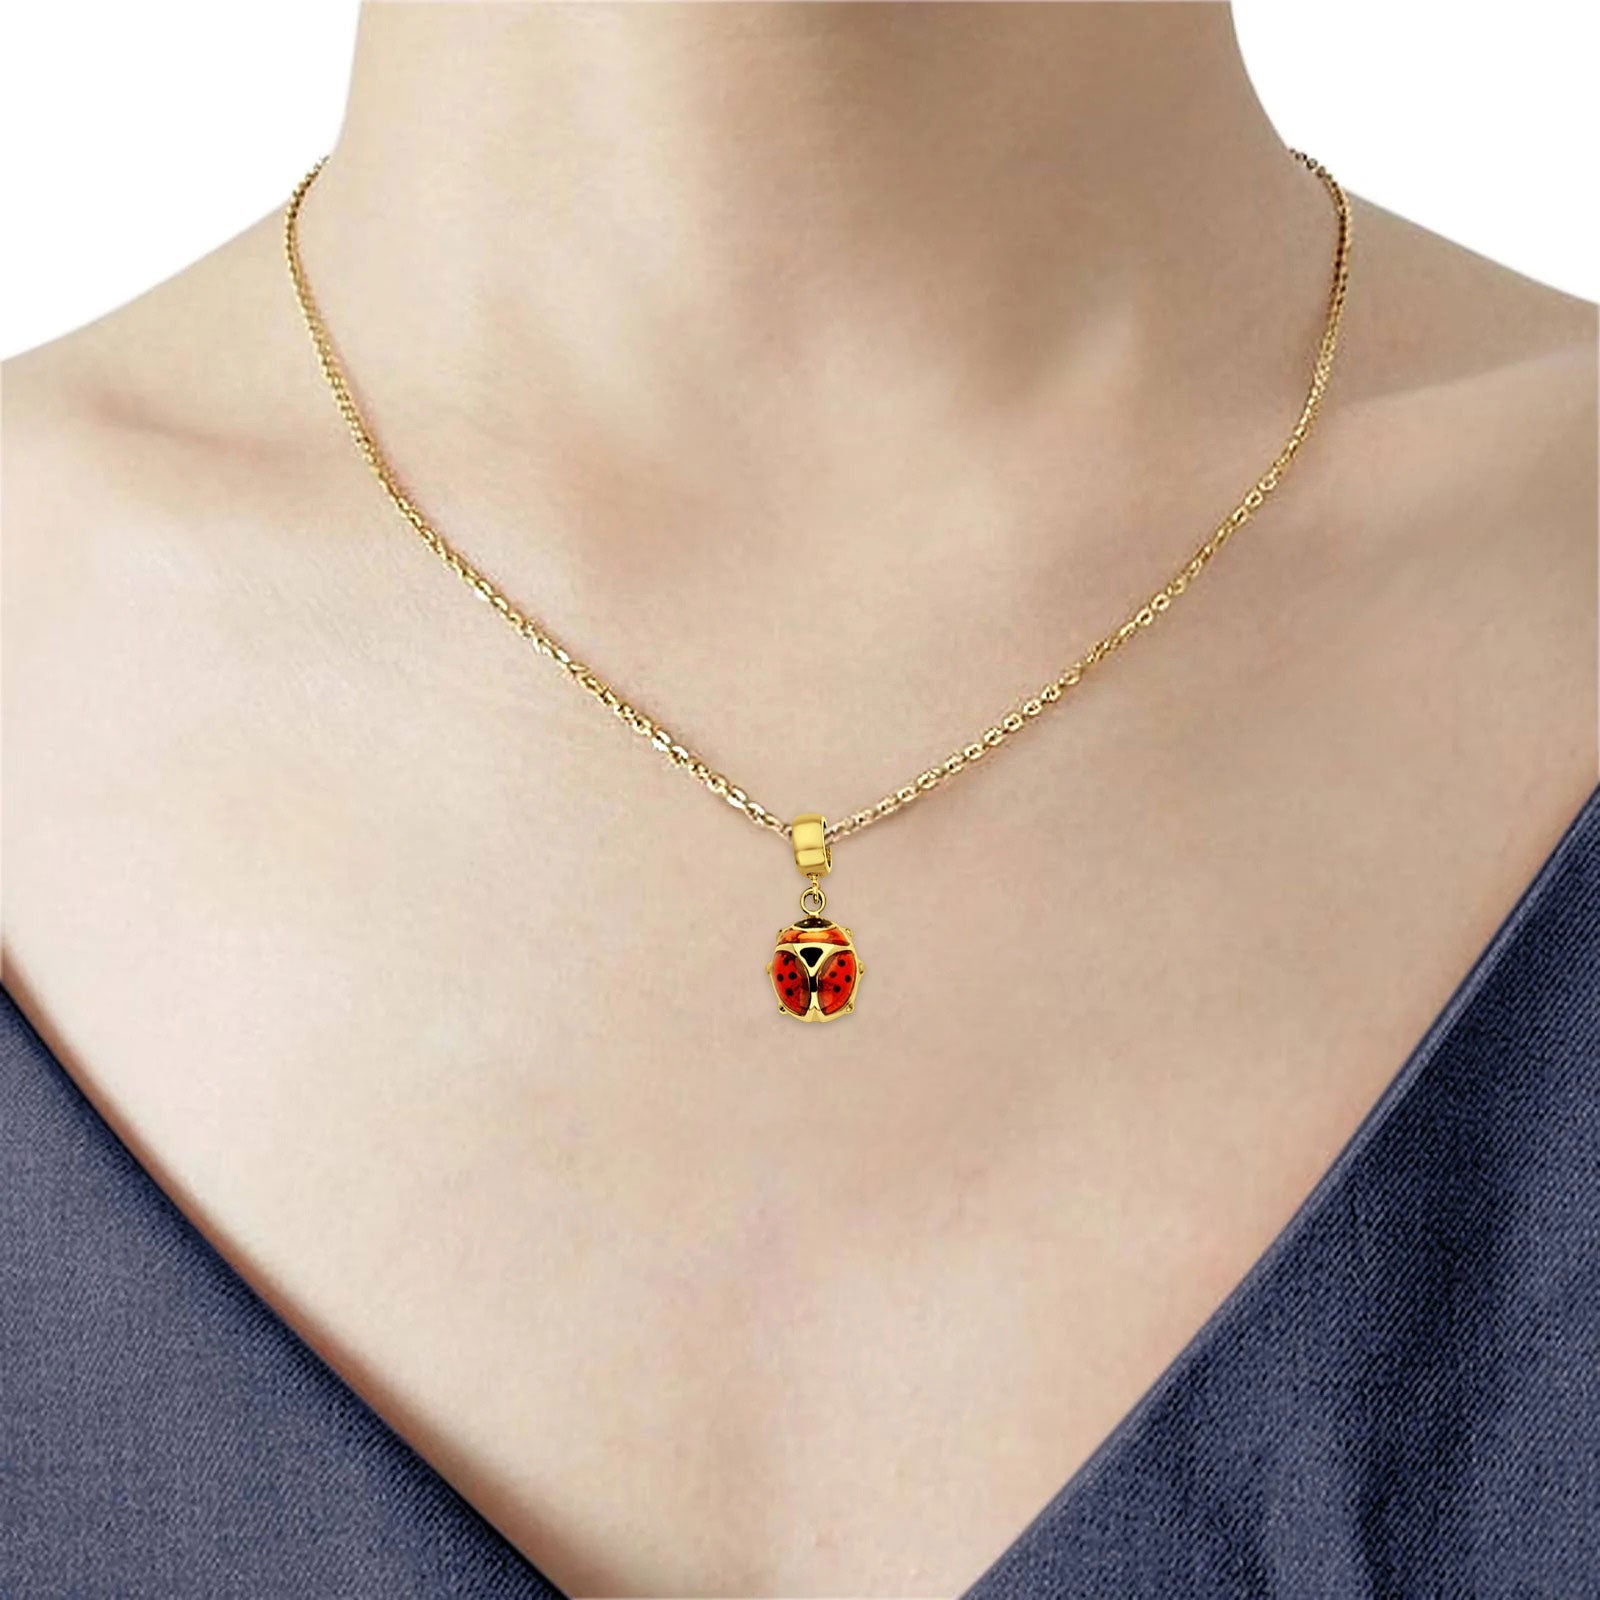 14K Yellow Gold Lady Bug Charm for Mix&Match Pendant 20mmX9mm 1.0 grams